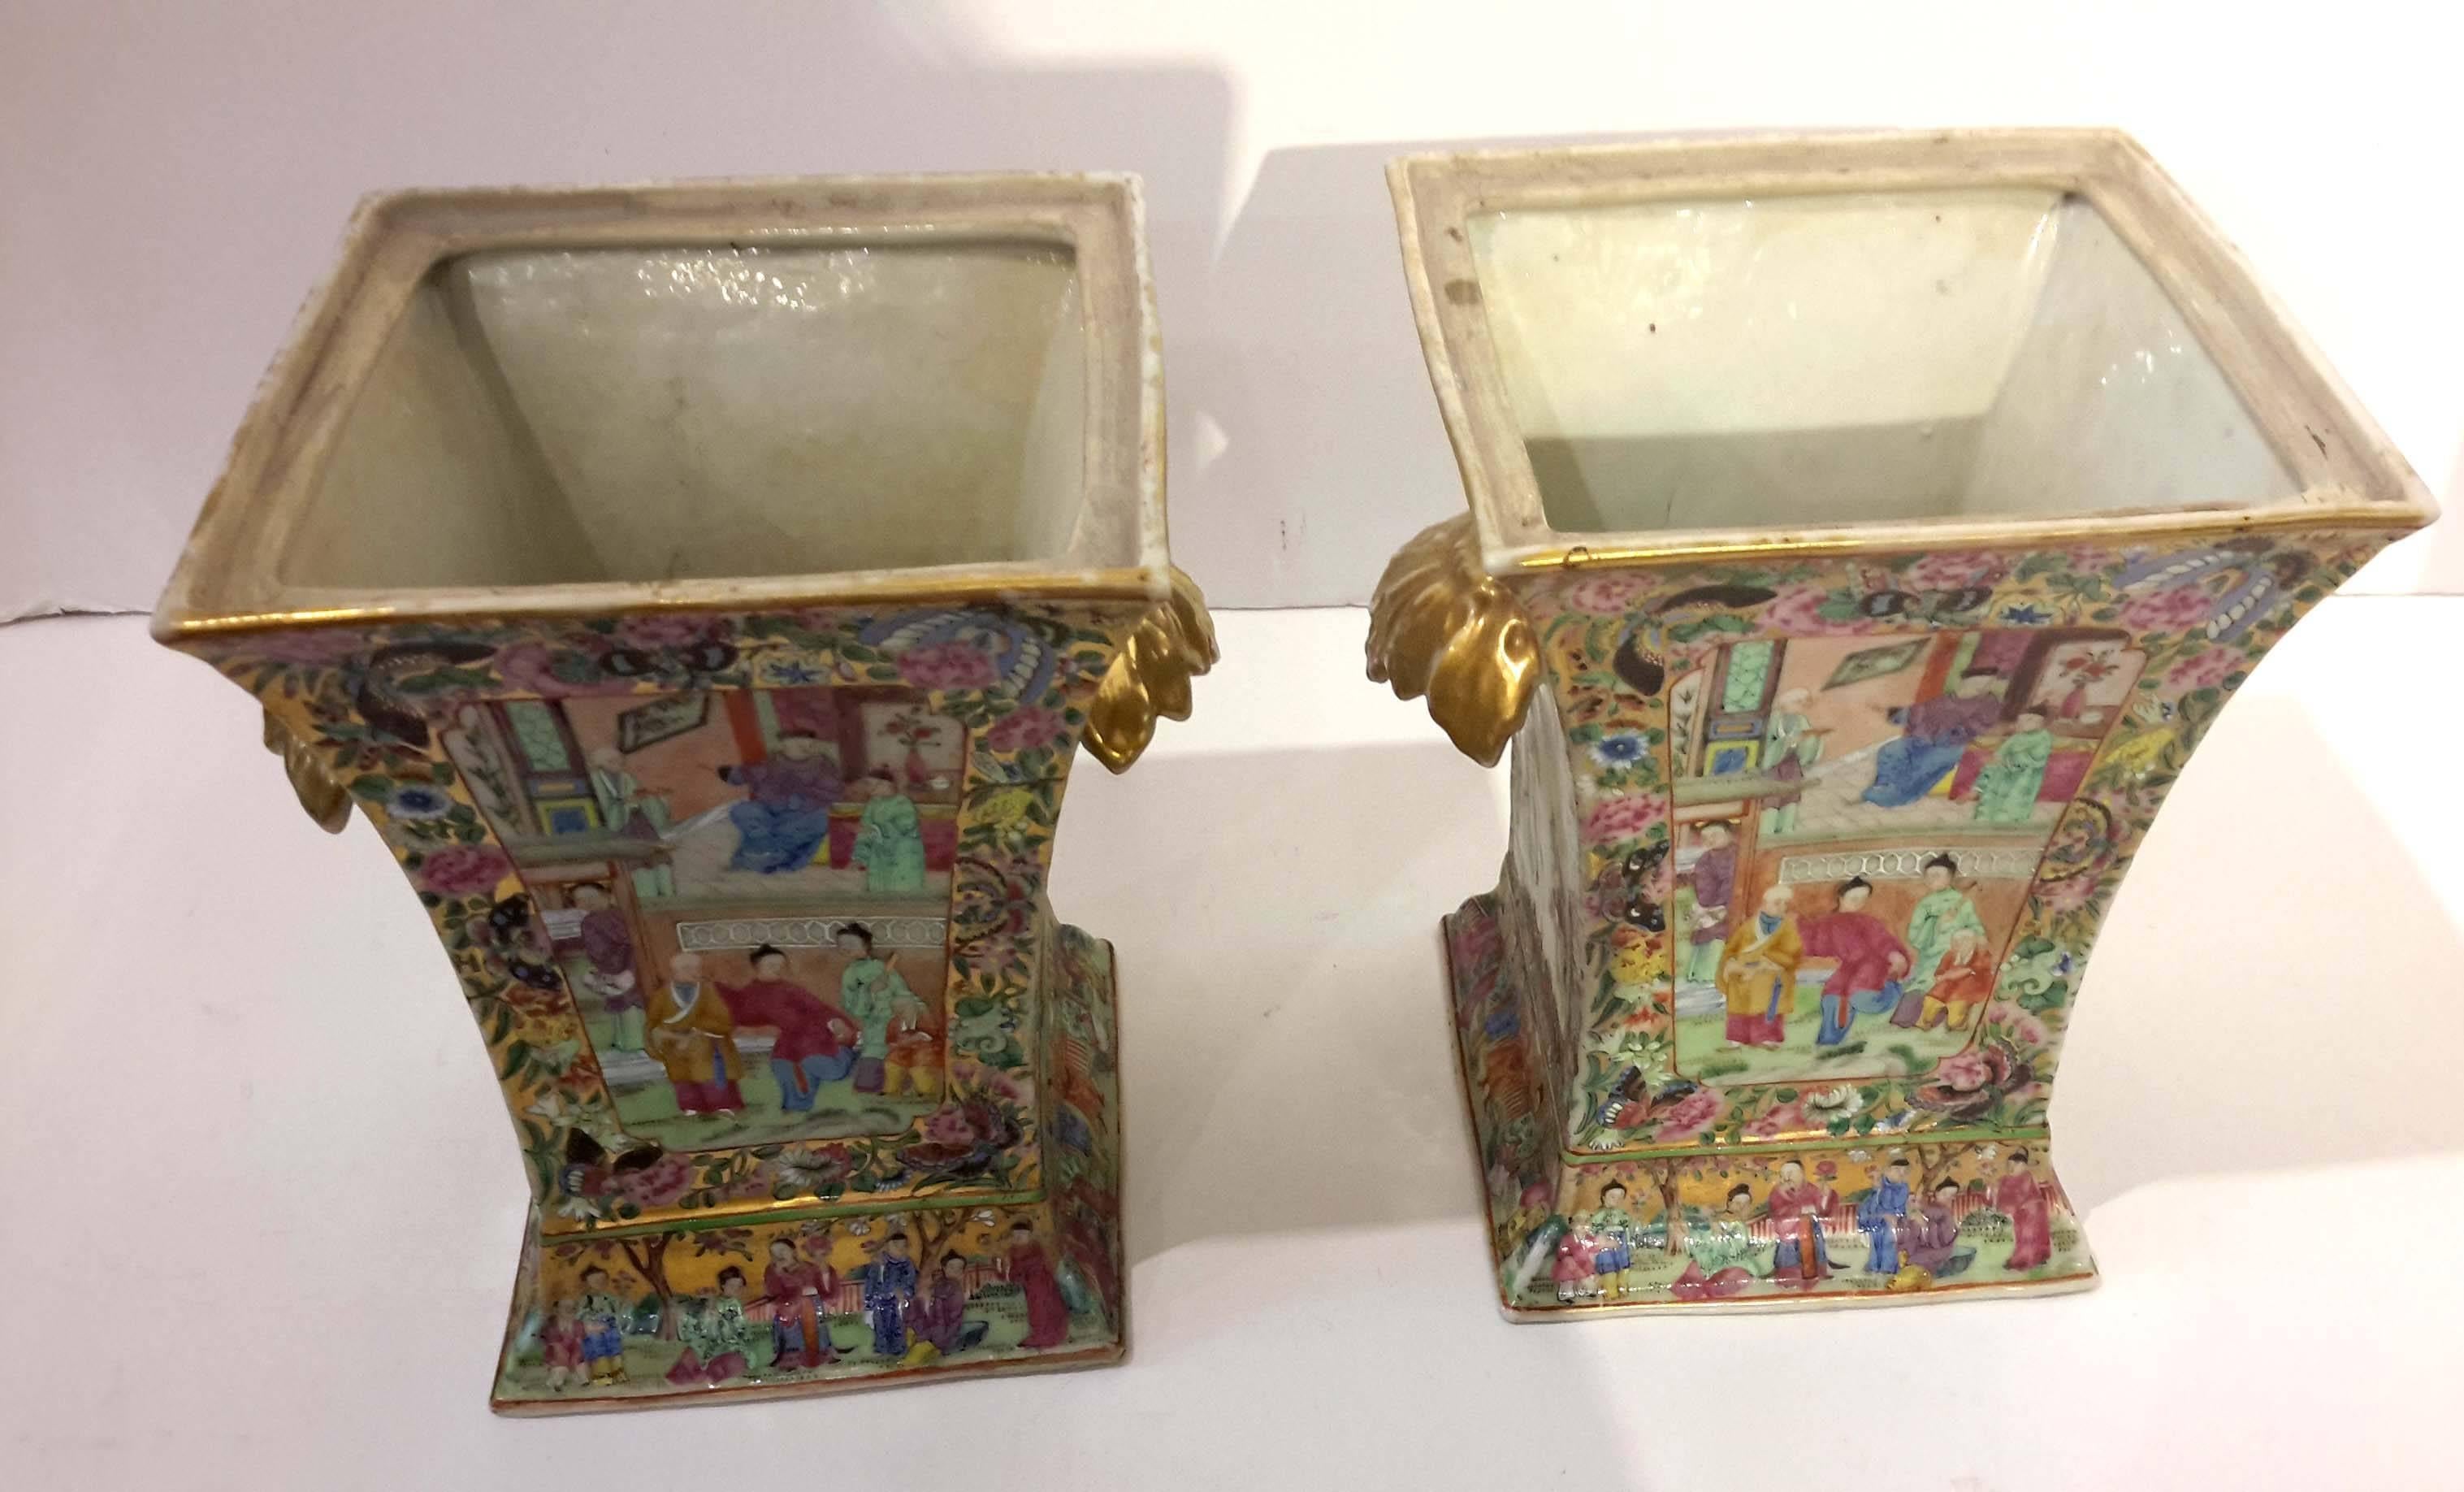 Enameled Pair of Chinese Export Famille Rose Porcelain Cachepot, Vases, 19th Century For Sale